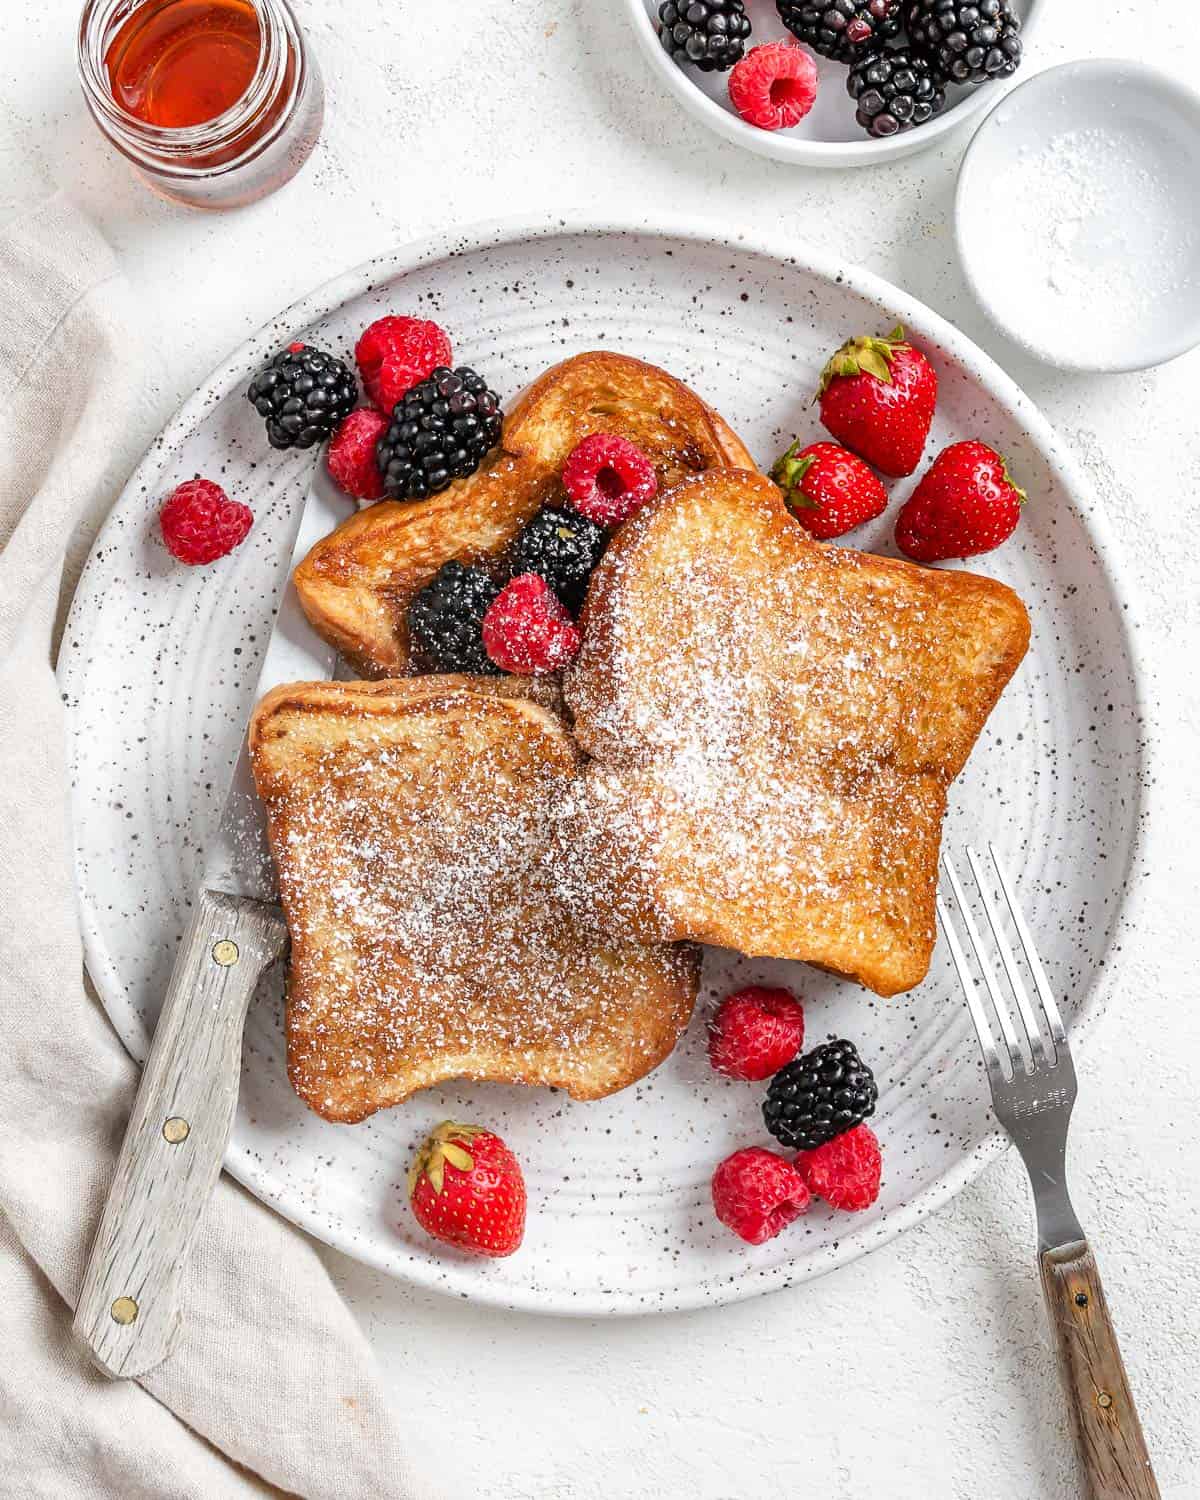 completed Vegan French Toast plated with fruits on a white plate